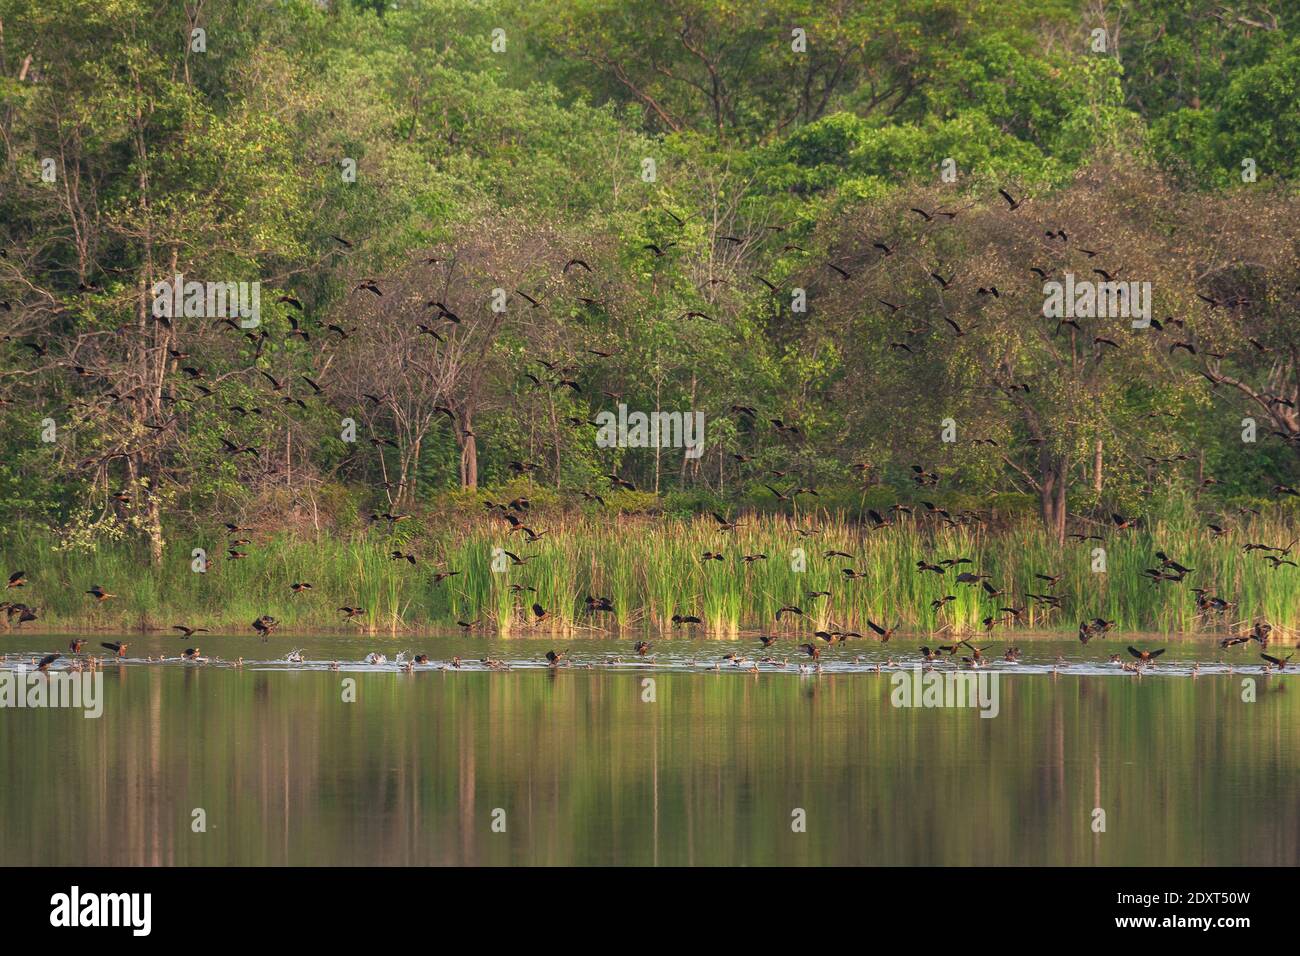 beautiful group of Lesser Whistling Duck on lake life and environment of rainforest nature background Stock Photo